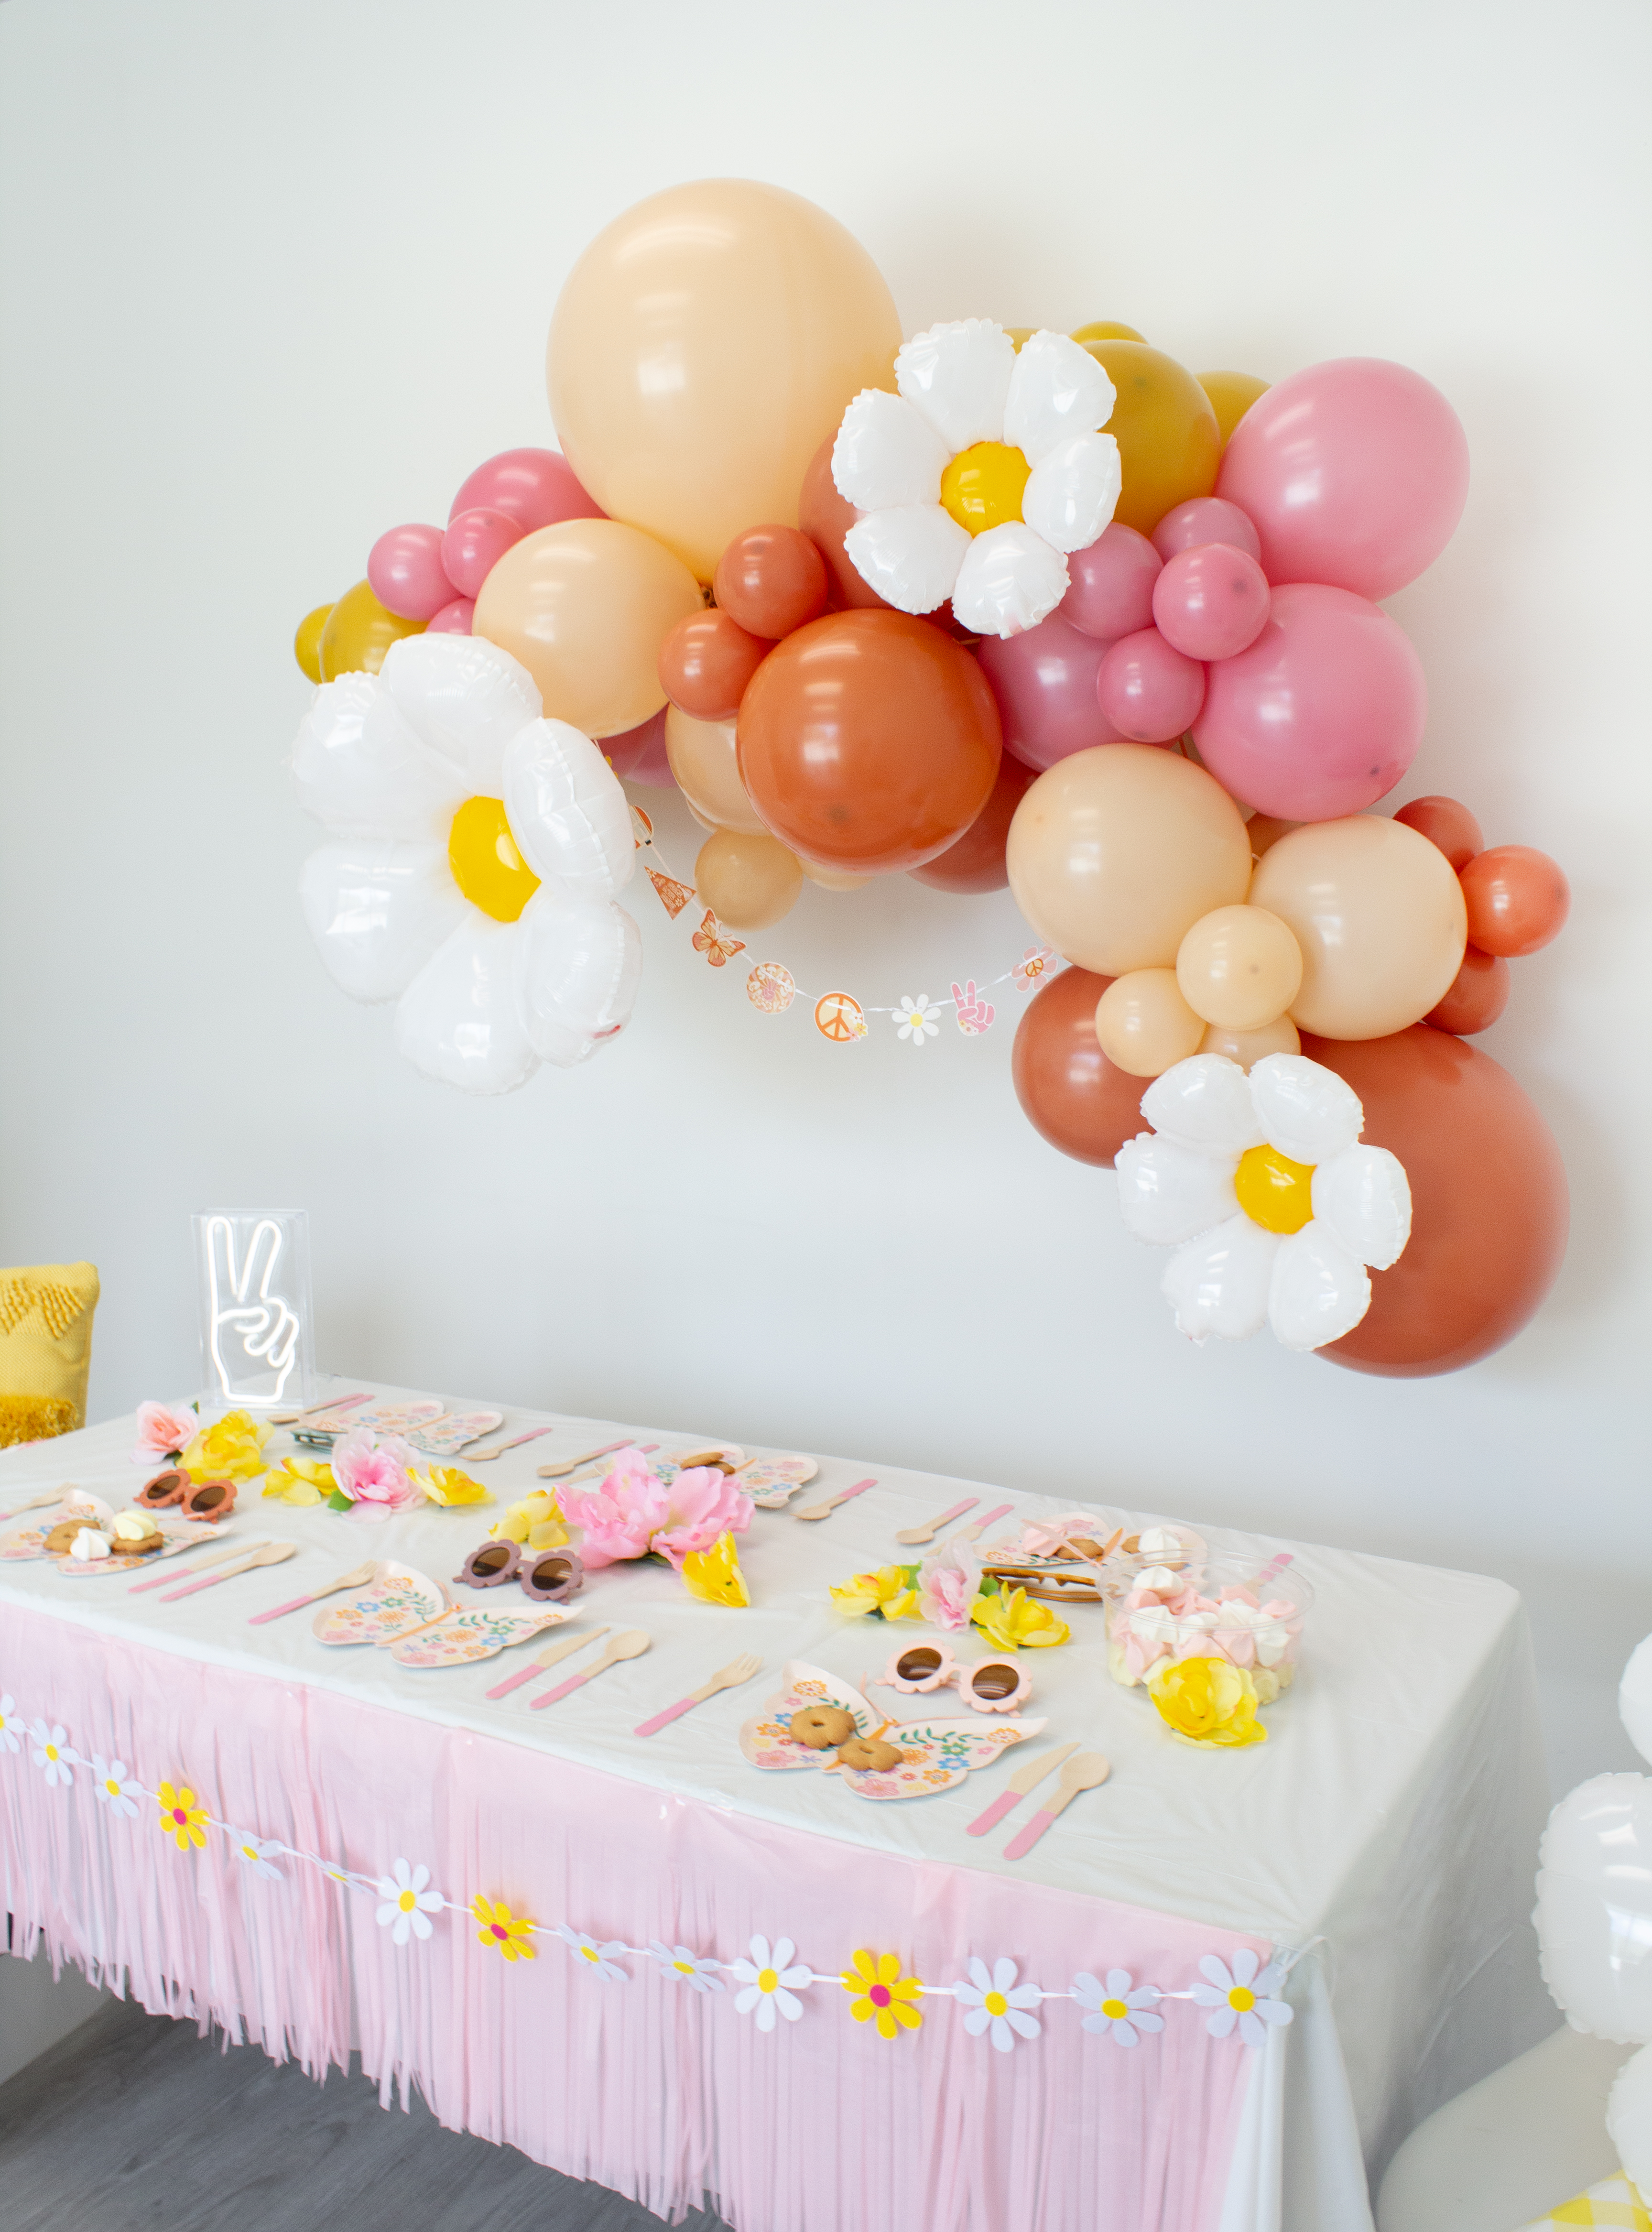 Baby Gender Reveal Party Supplies Balloon Arch Garland Kit Pastel Macaron  Pink Blue Latex Pastel Pink Balloons Decoration Favor Baby Shower T200624  From Luo09, $25.61